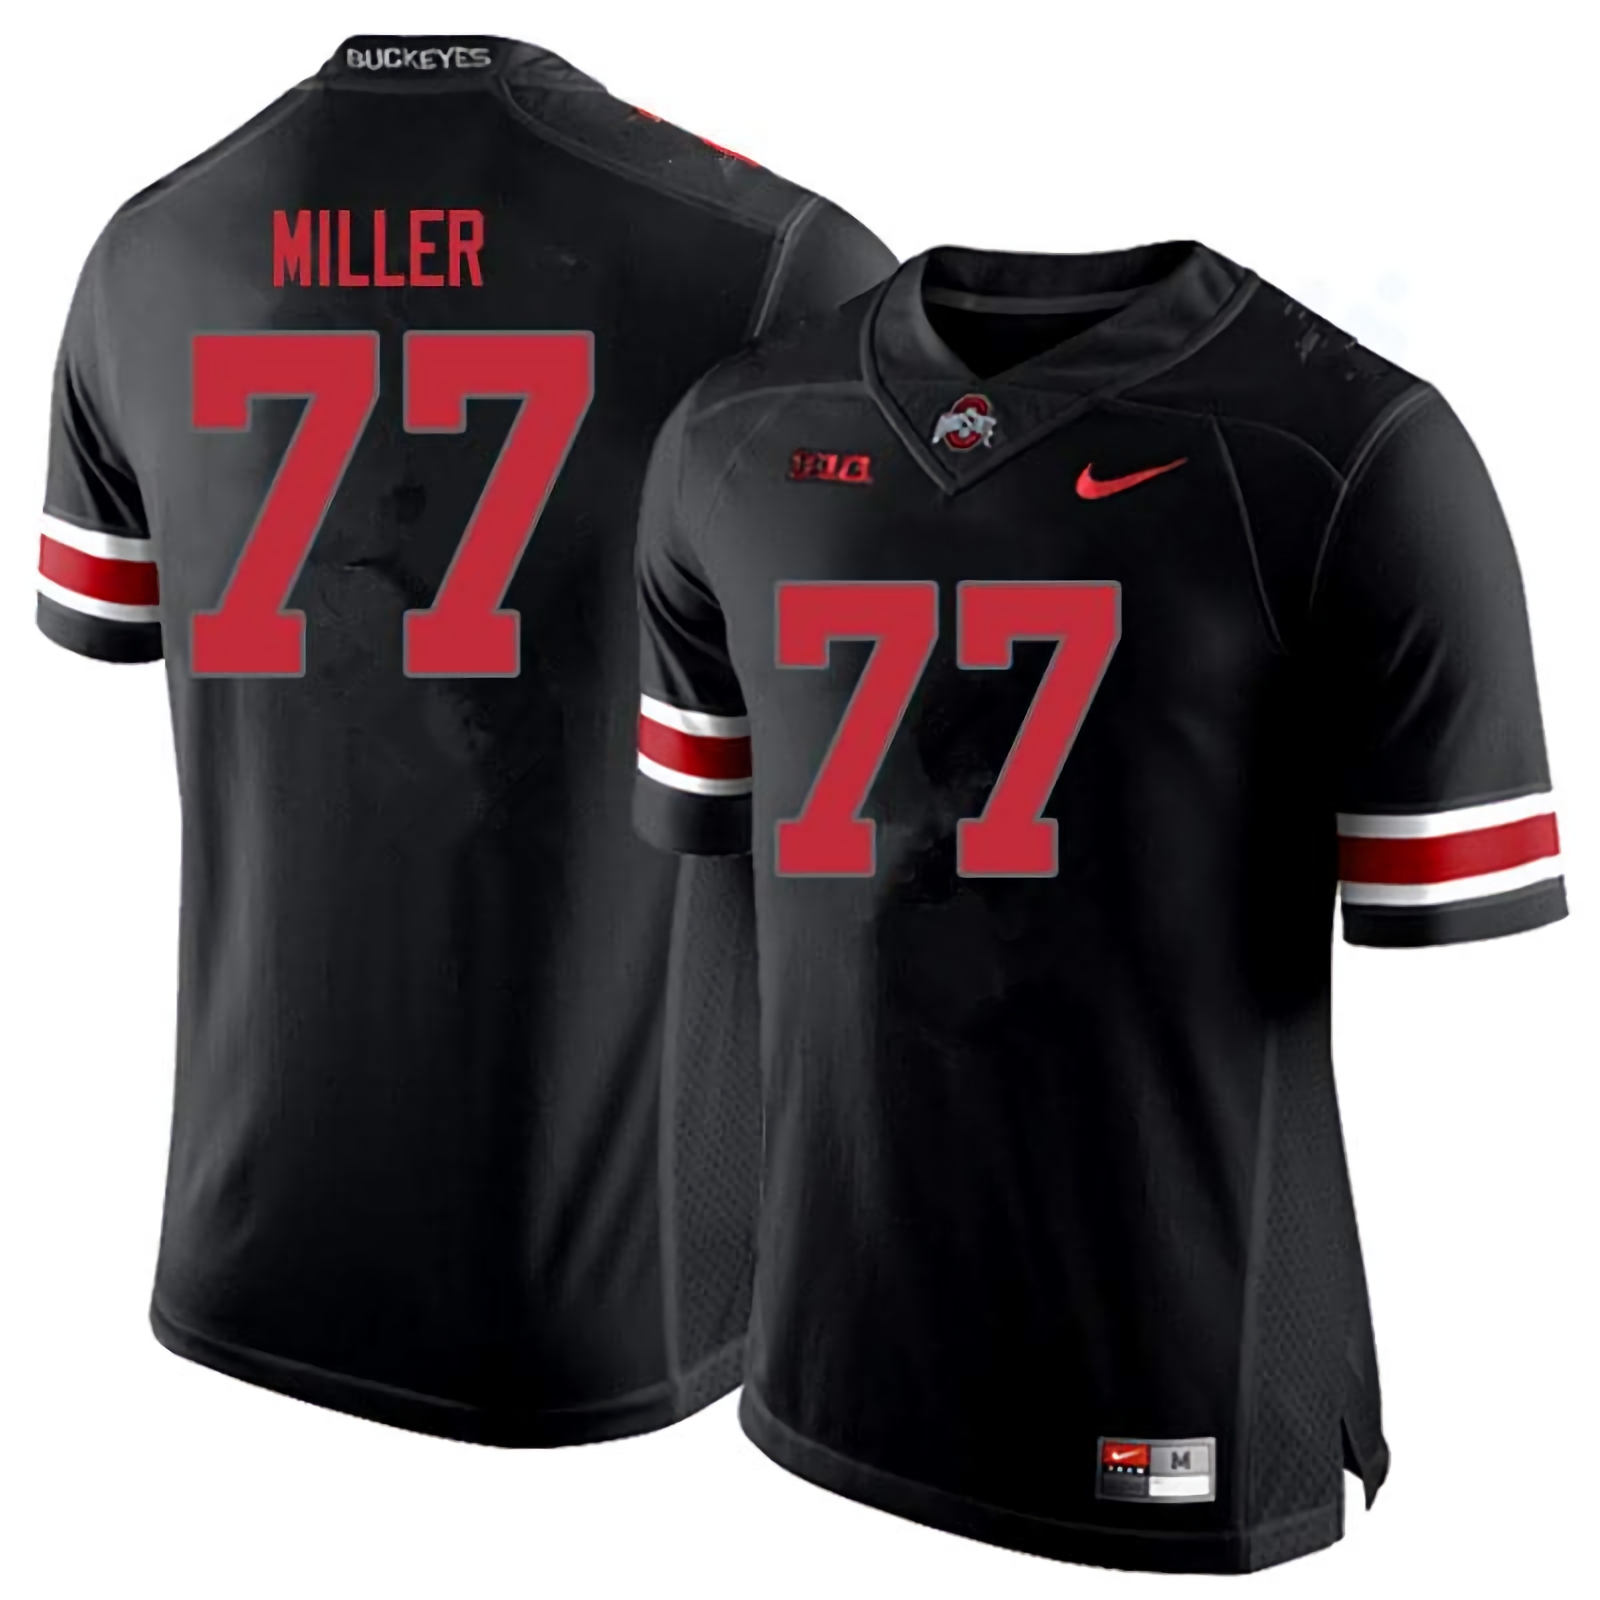 Harry Miller Ohio State Buckeyes Men's NCAA #77 Nike Blackout College Stitched Football Jersey DIJ4056ZS